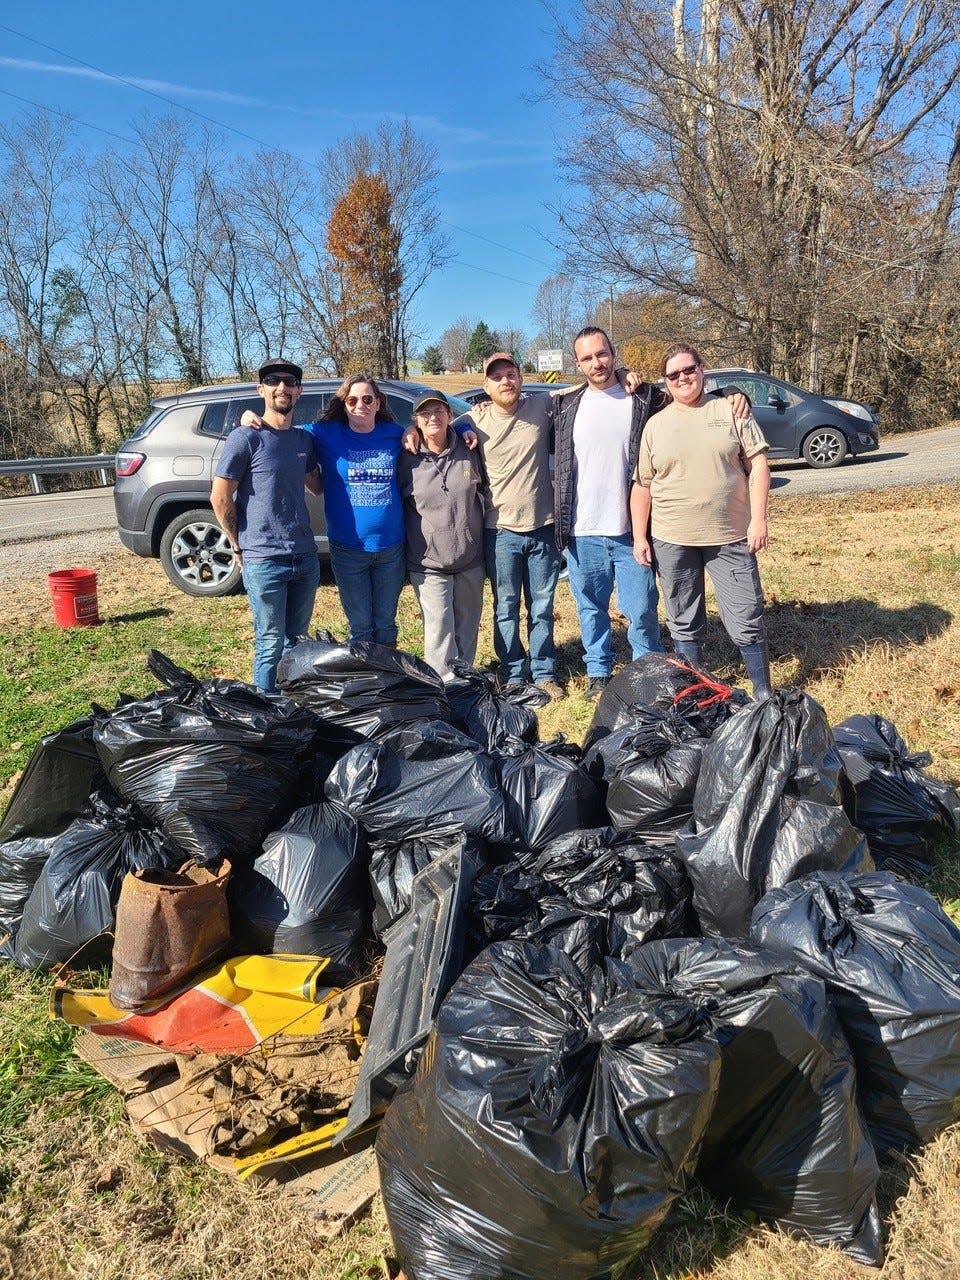 Keep Maury Beautiful collected 520 pounds of litter from Cleburne Road on Nov. 11 as part of TDOT's No Trash November initiative.